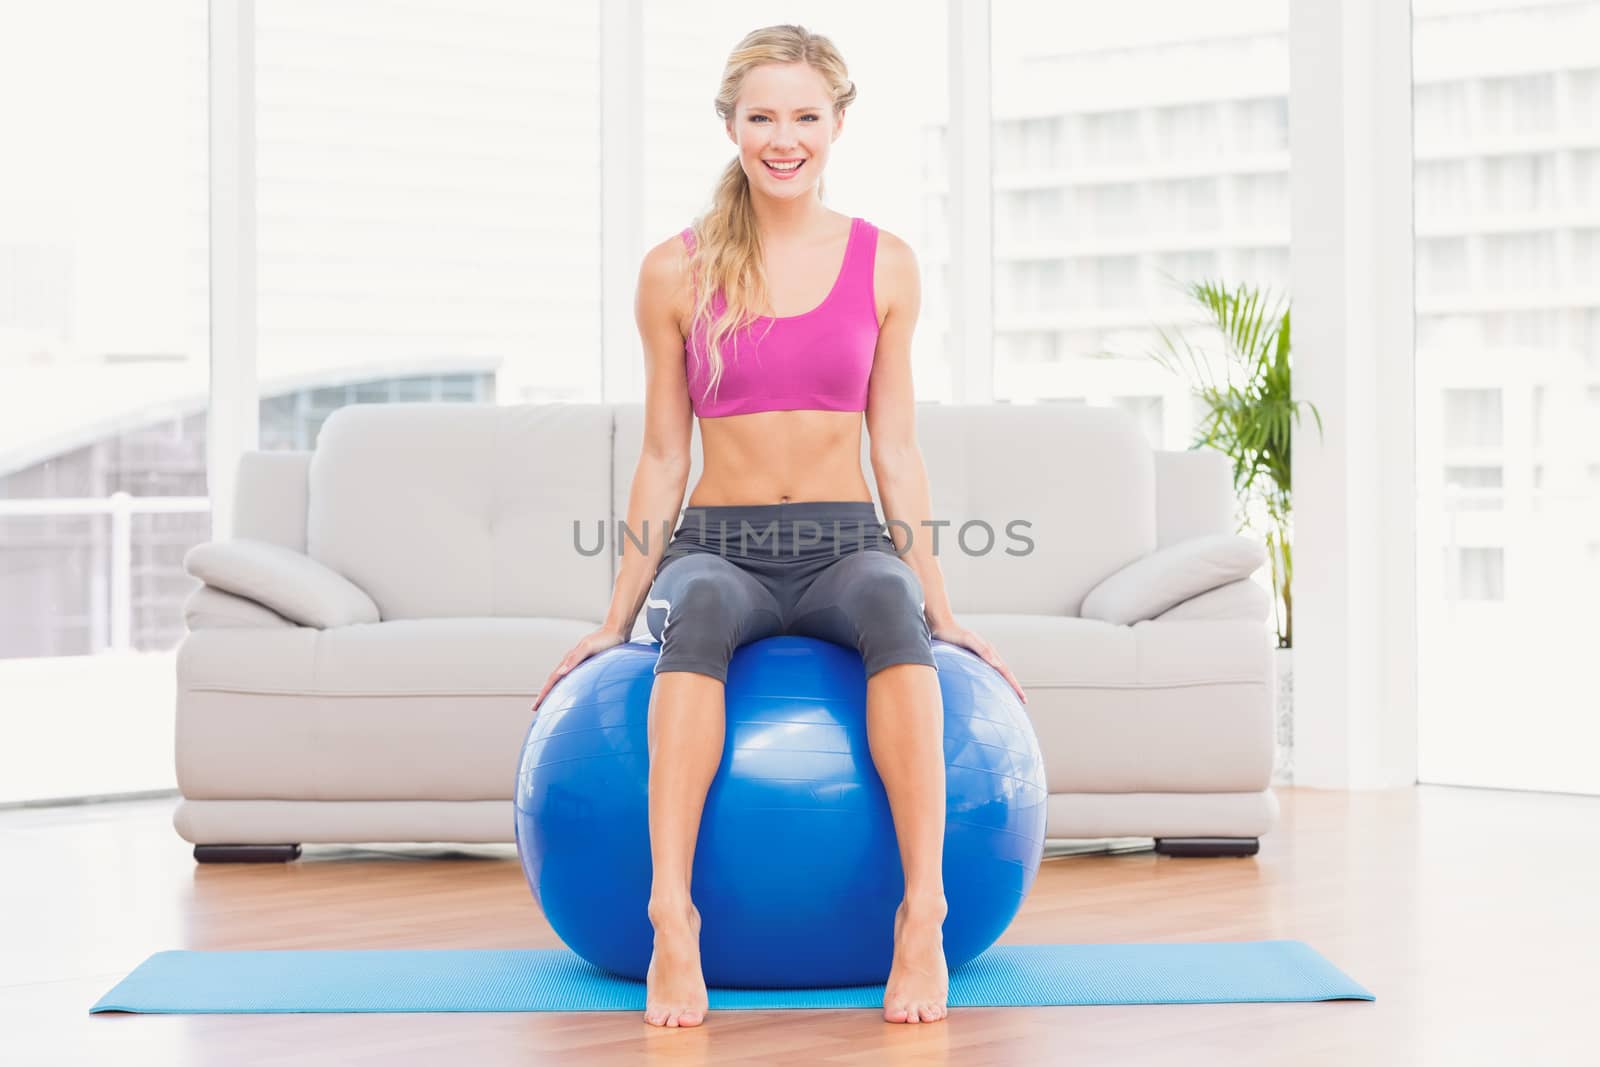 Fit blonde sitting on exercise ball smiling at camera at home in the living room